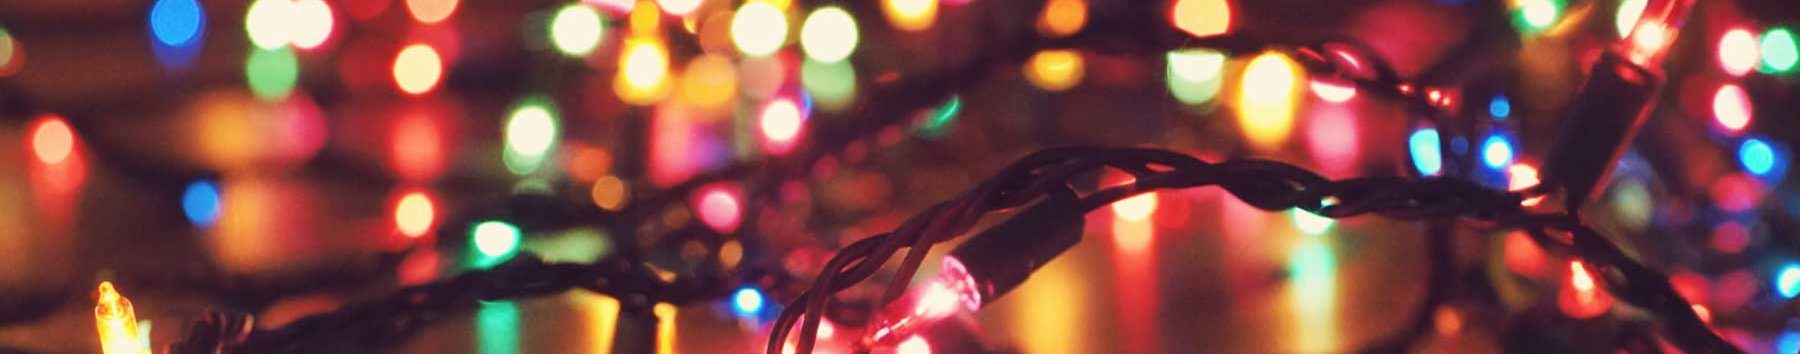 A strand of small multicolored twinkle lights in front of blurred multicolored lights at Christmas